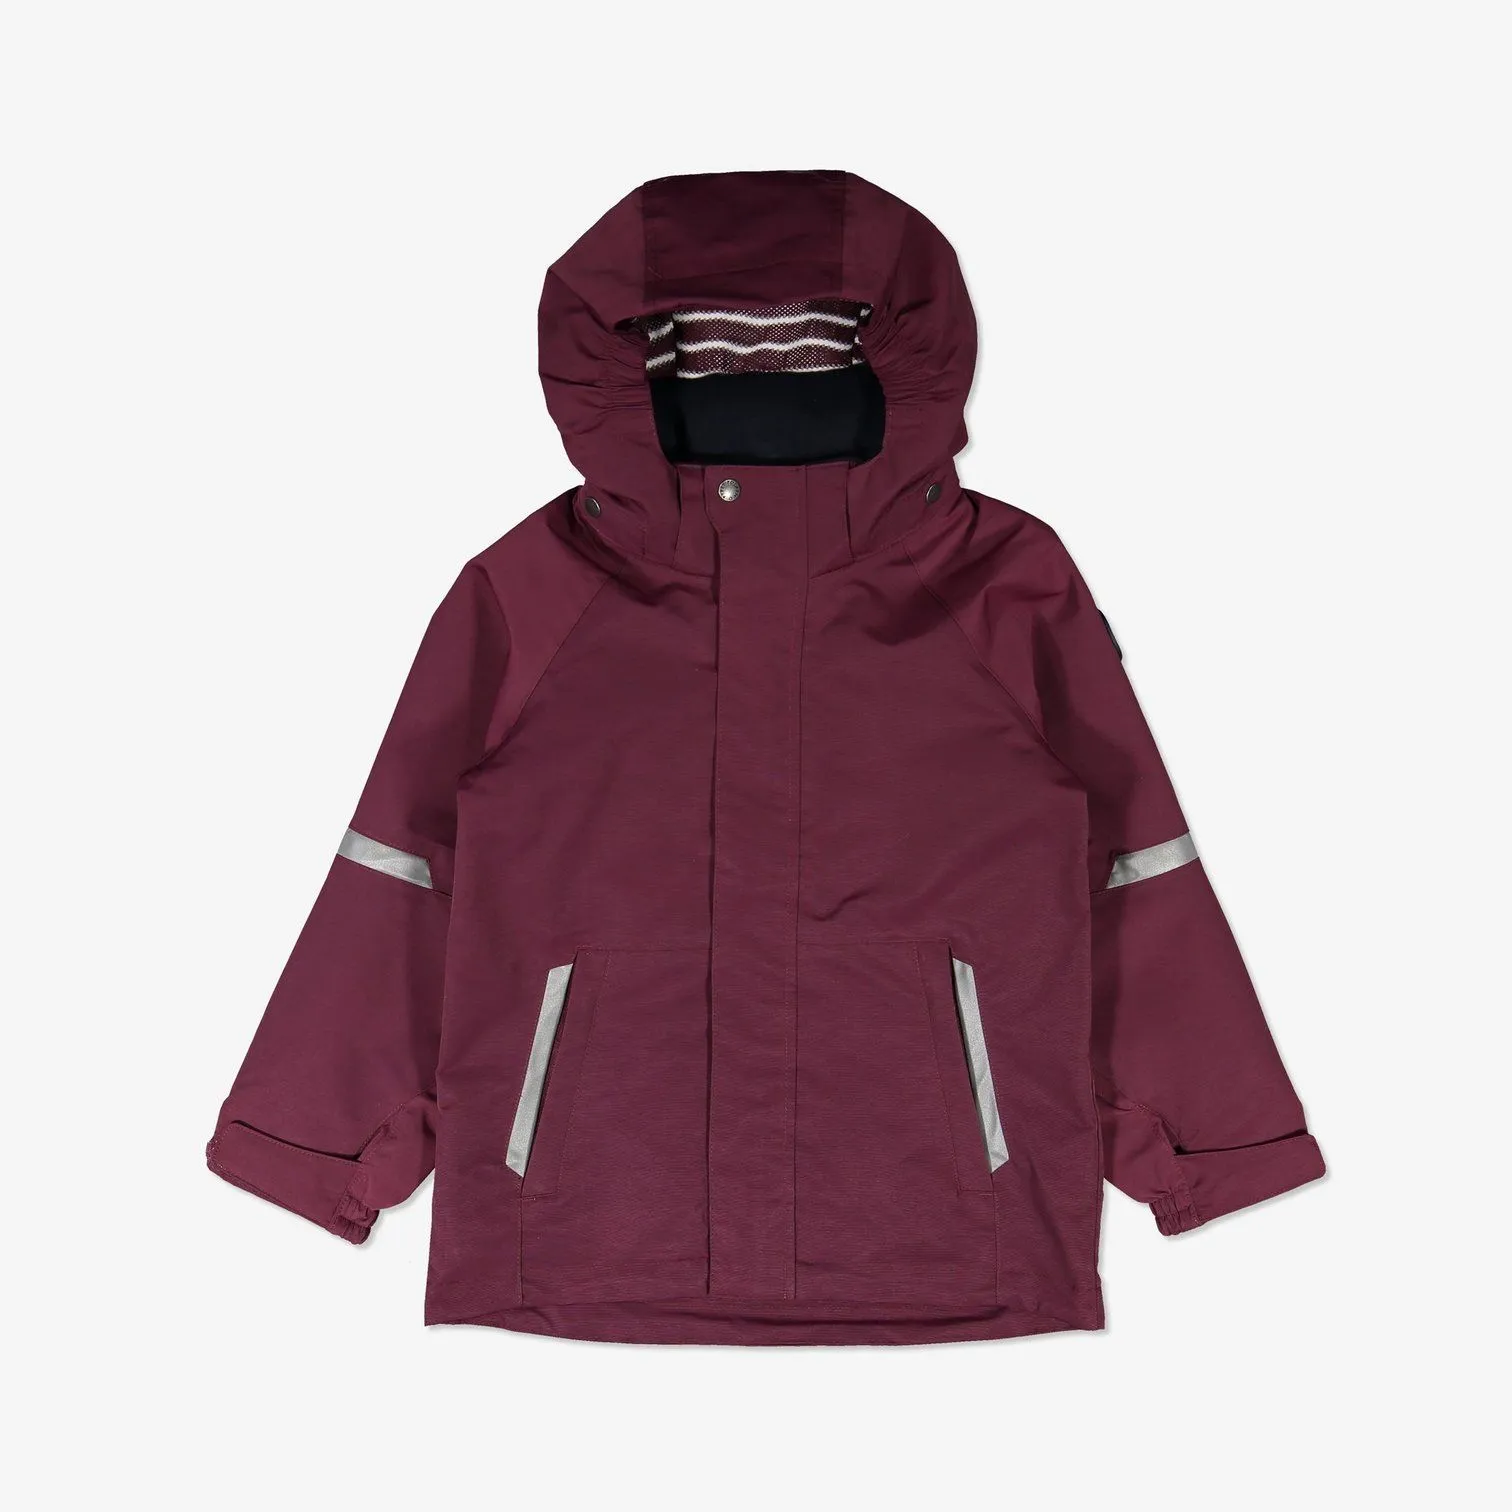 Stay warm and dry in the Waterproof Kids Shell Jacket.